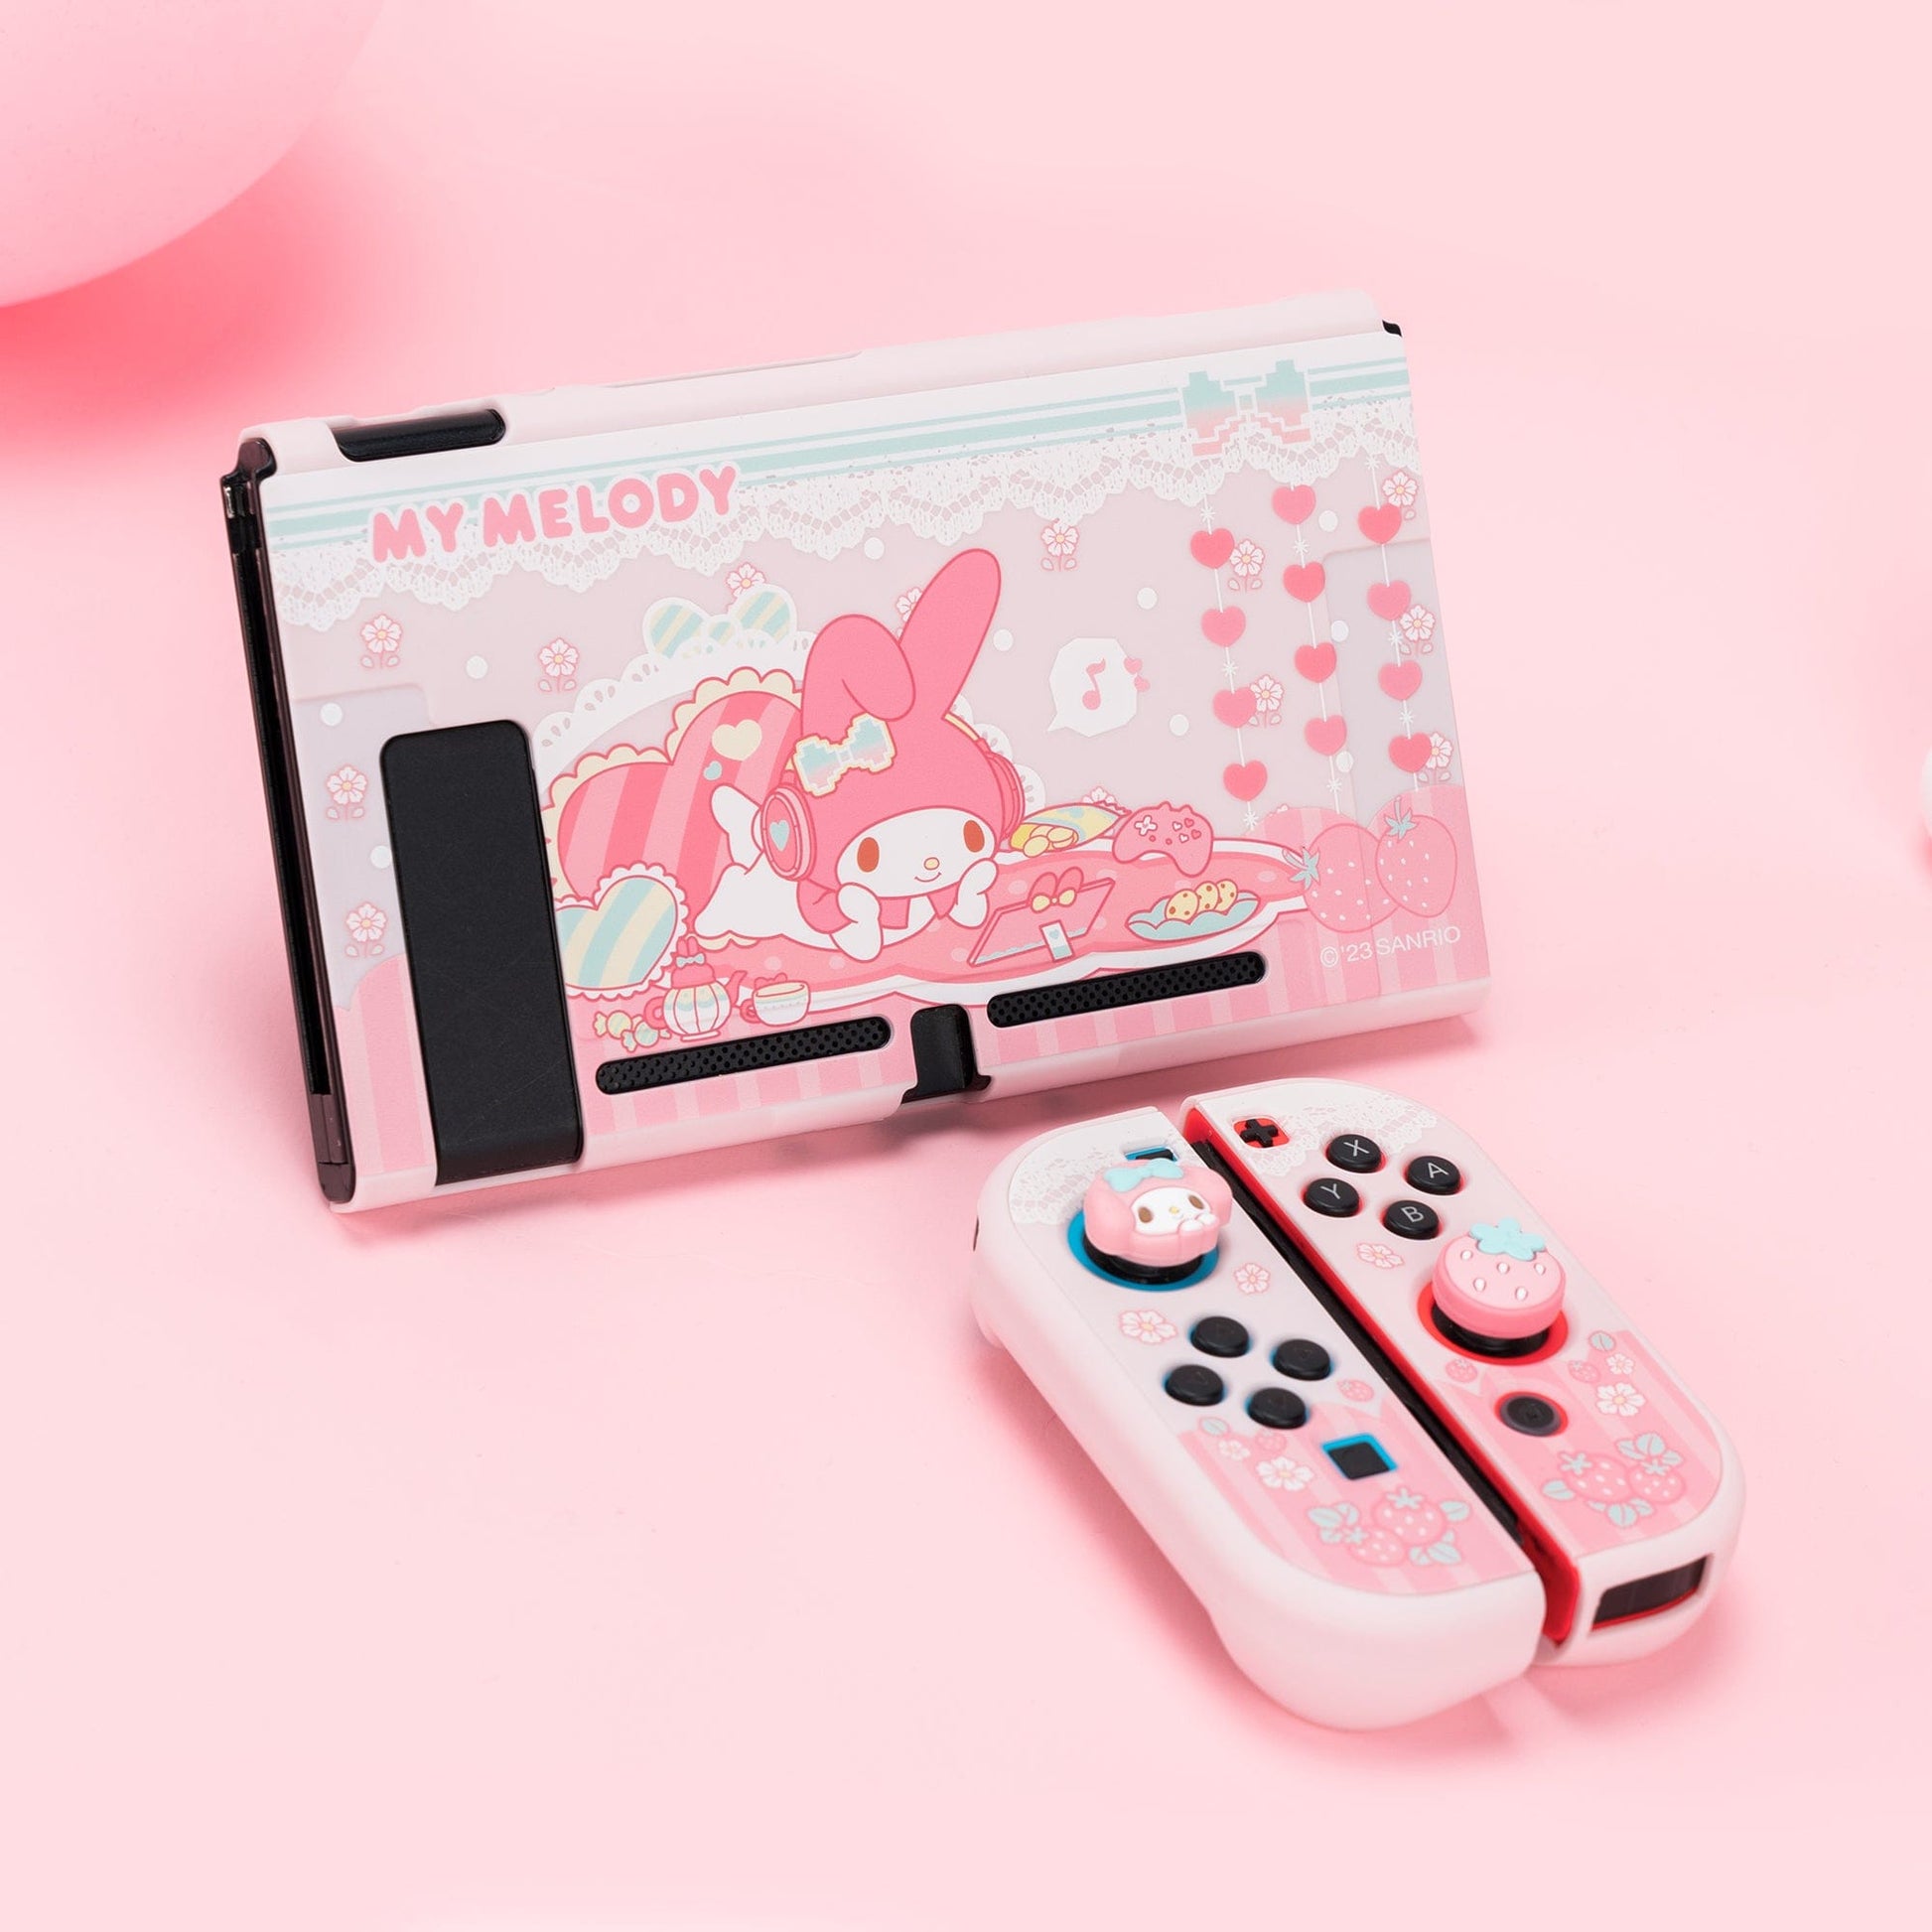 GeekShare x Sanrio Protective Case -Gaming Time